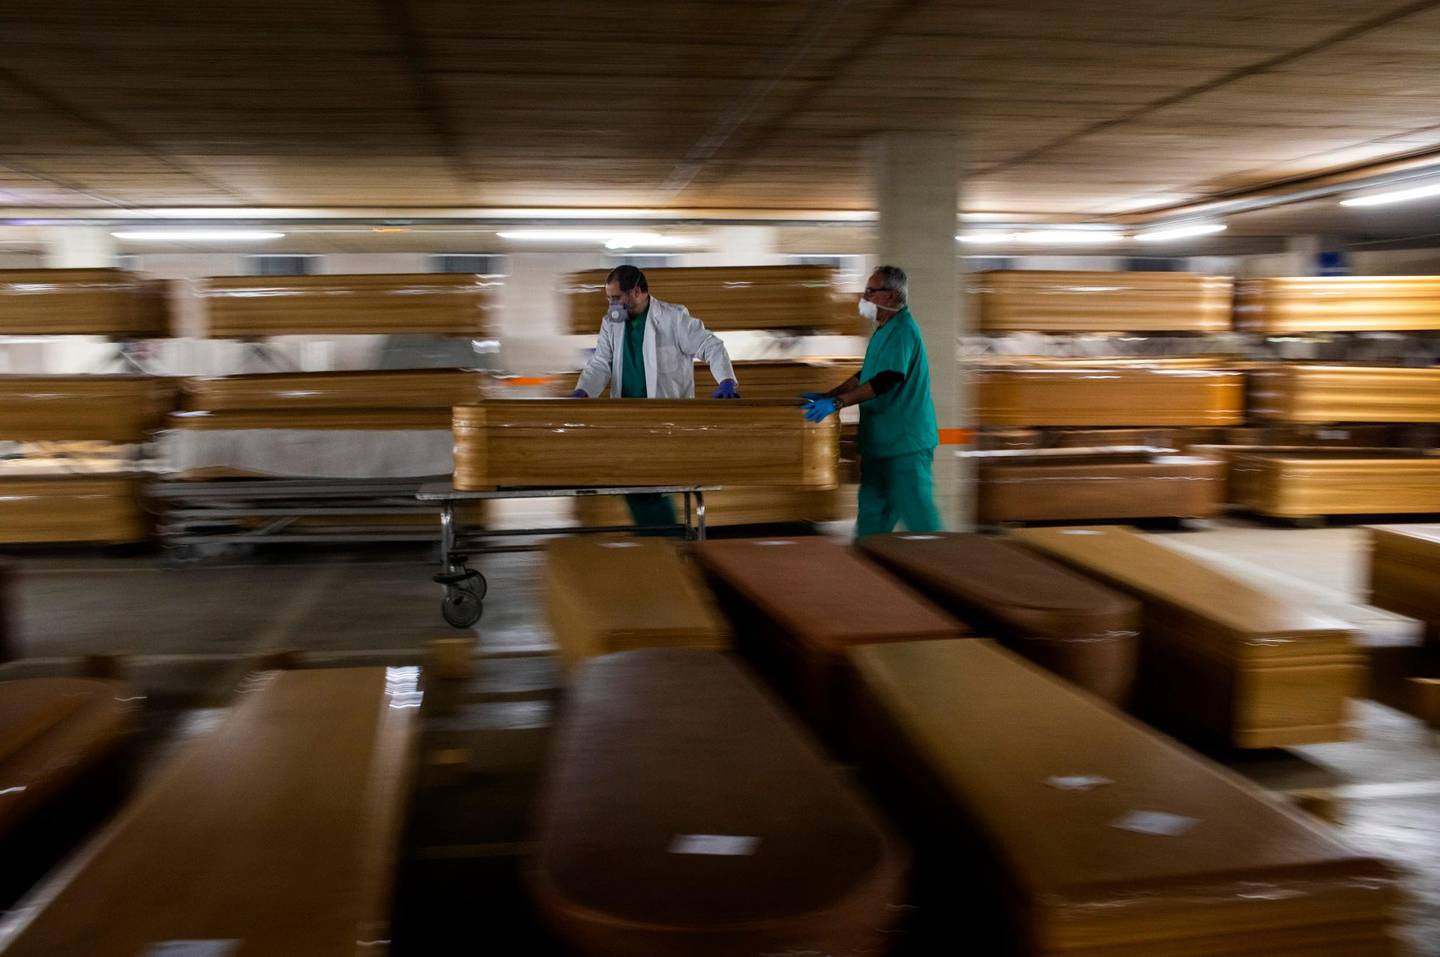 Workers move a coffin with the body of a victim of COVID-19 as other coffins are stored waiting for burial or cremation at the Collserola morgue in Barcelona, Spain, on April 2, 2020. (AP Photo/Emilio Morenatti)